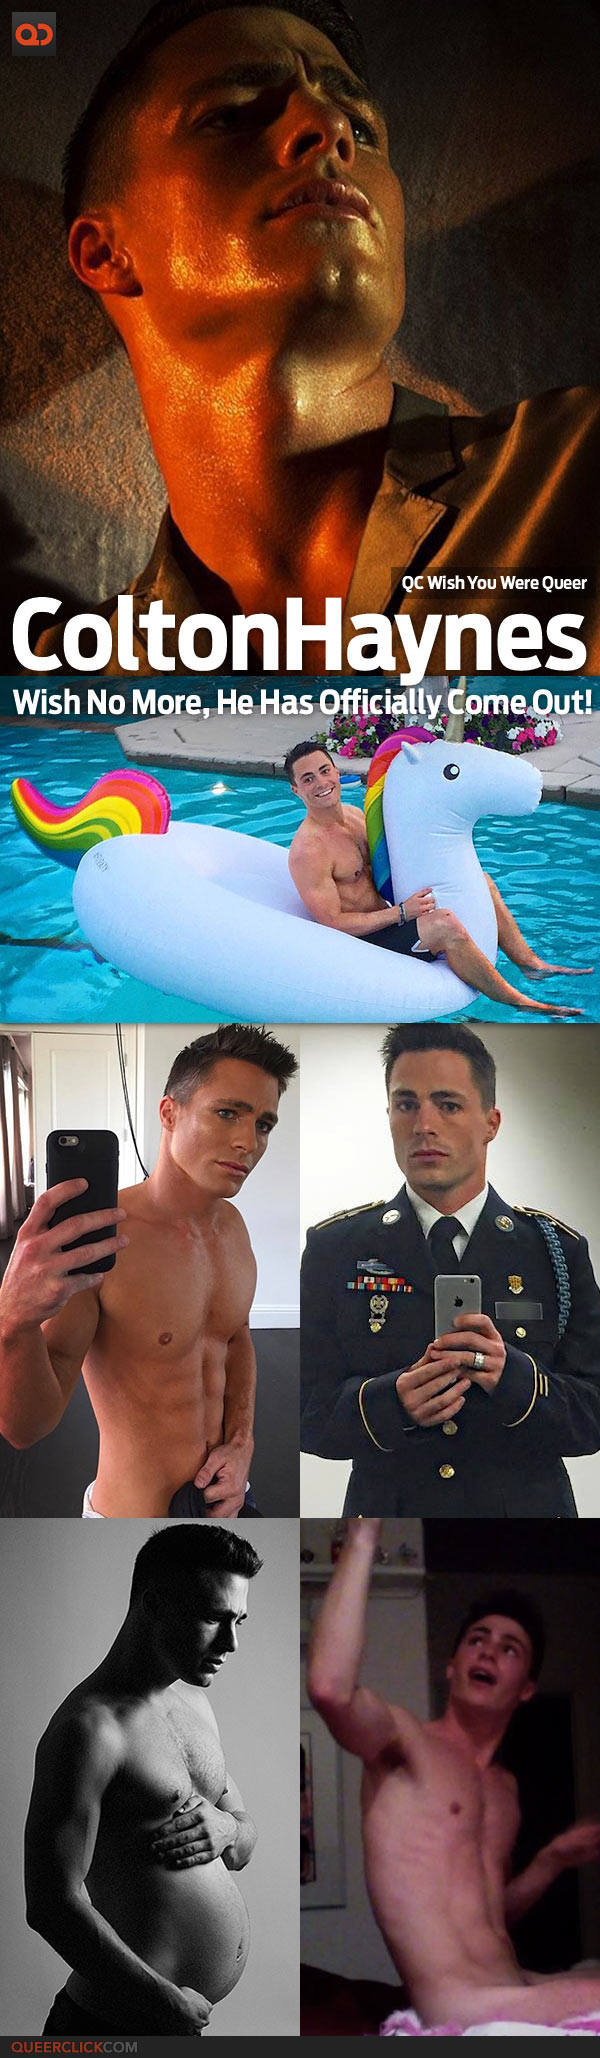 qc-wywq-colton_haynes_comes_out-teaser